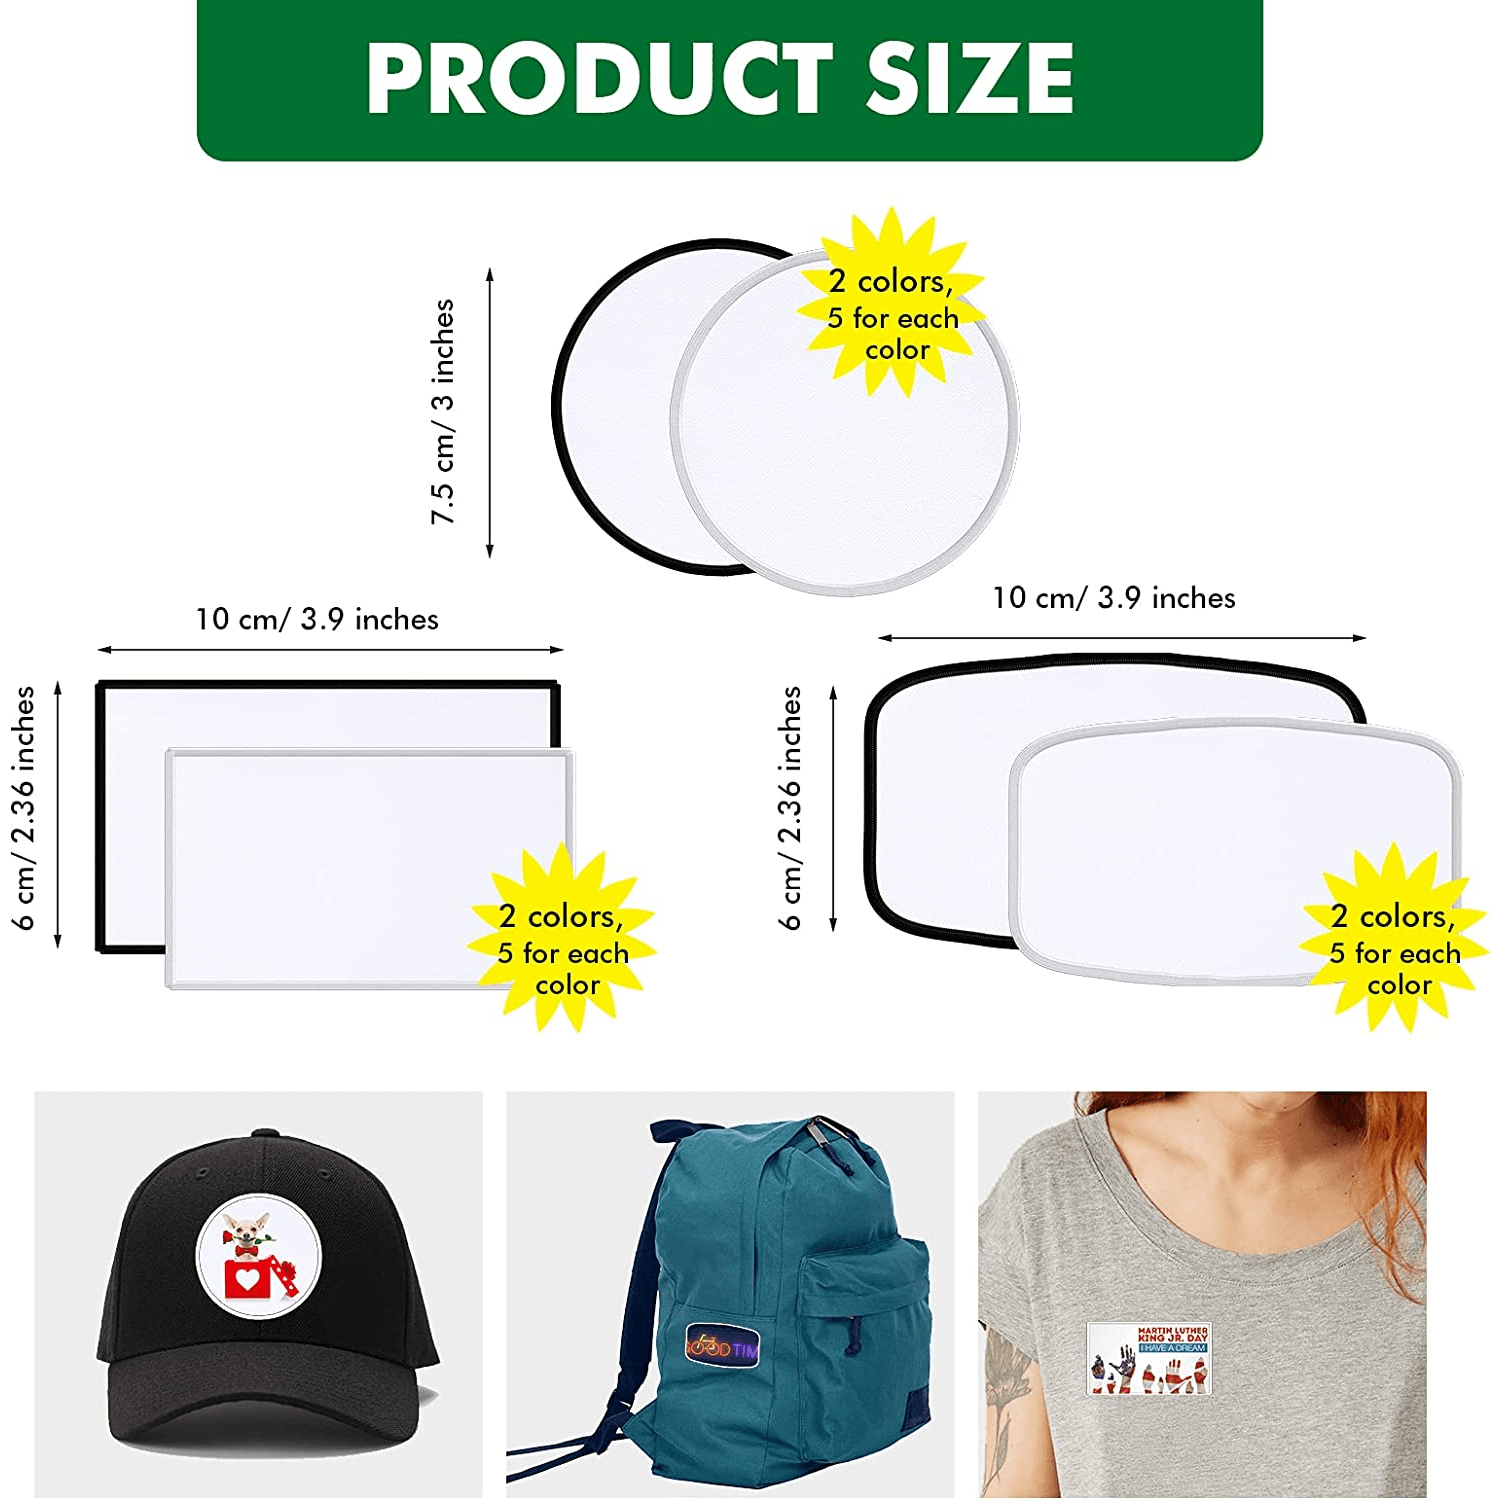 Embroidered hat patches for sublimation